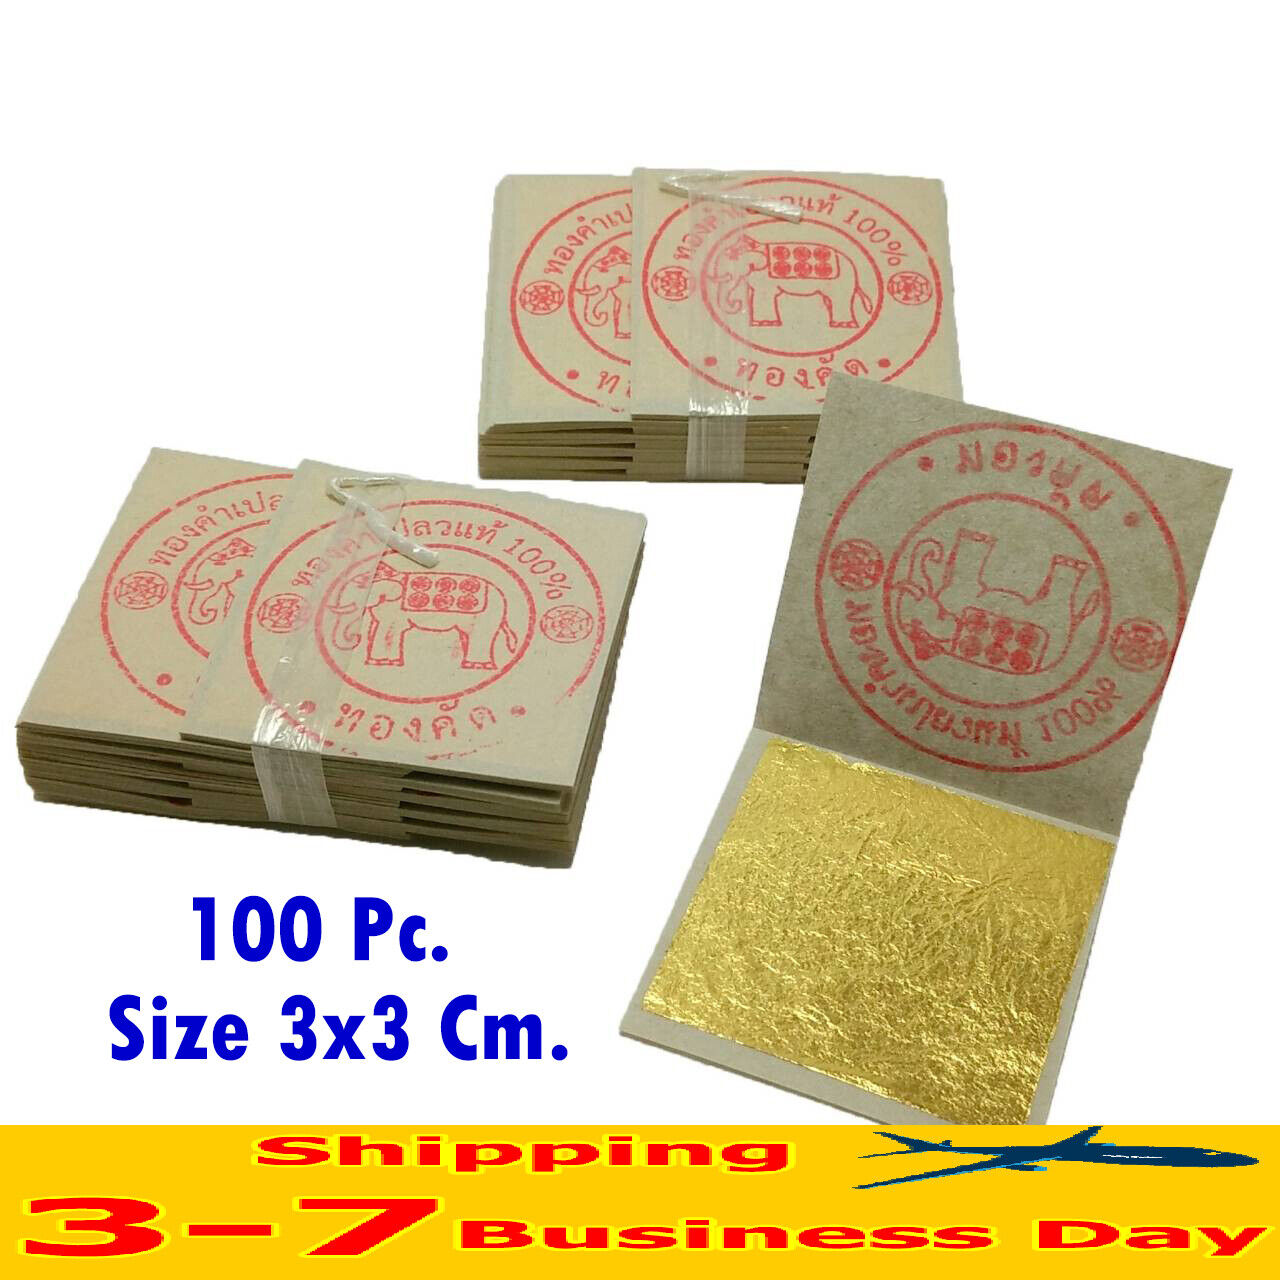 Gold Leaf Gilding Sheet Genuine Real Pure 24k For Art Work Only 3x3 100pc.